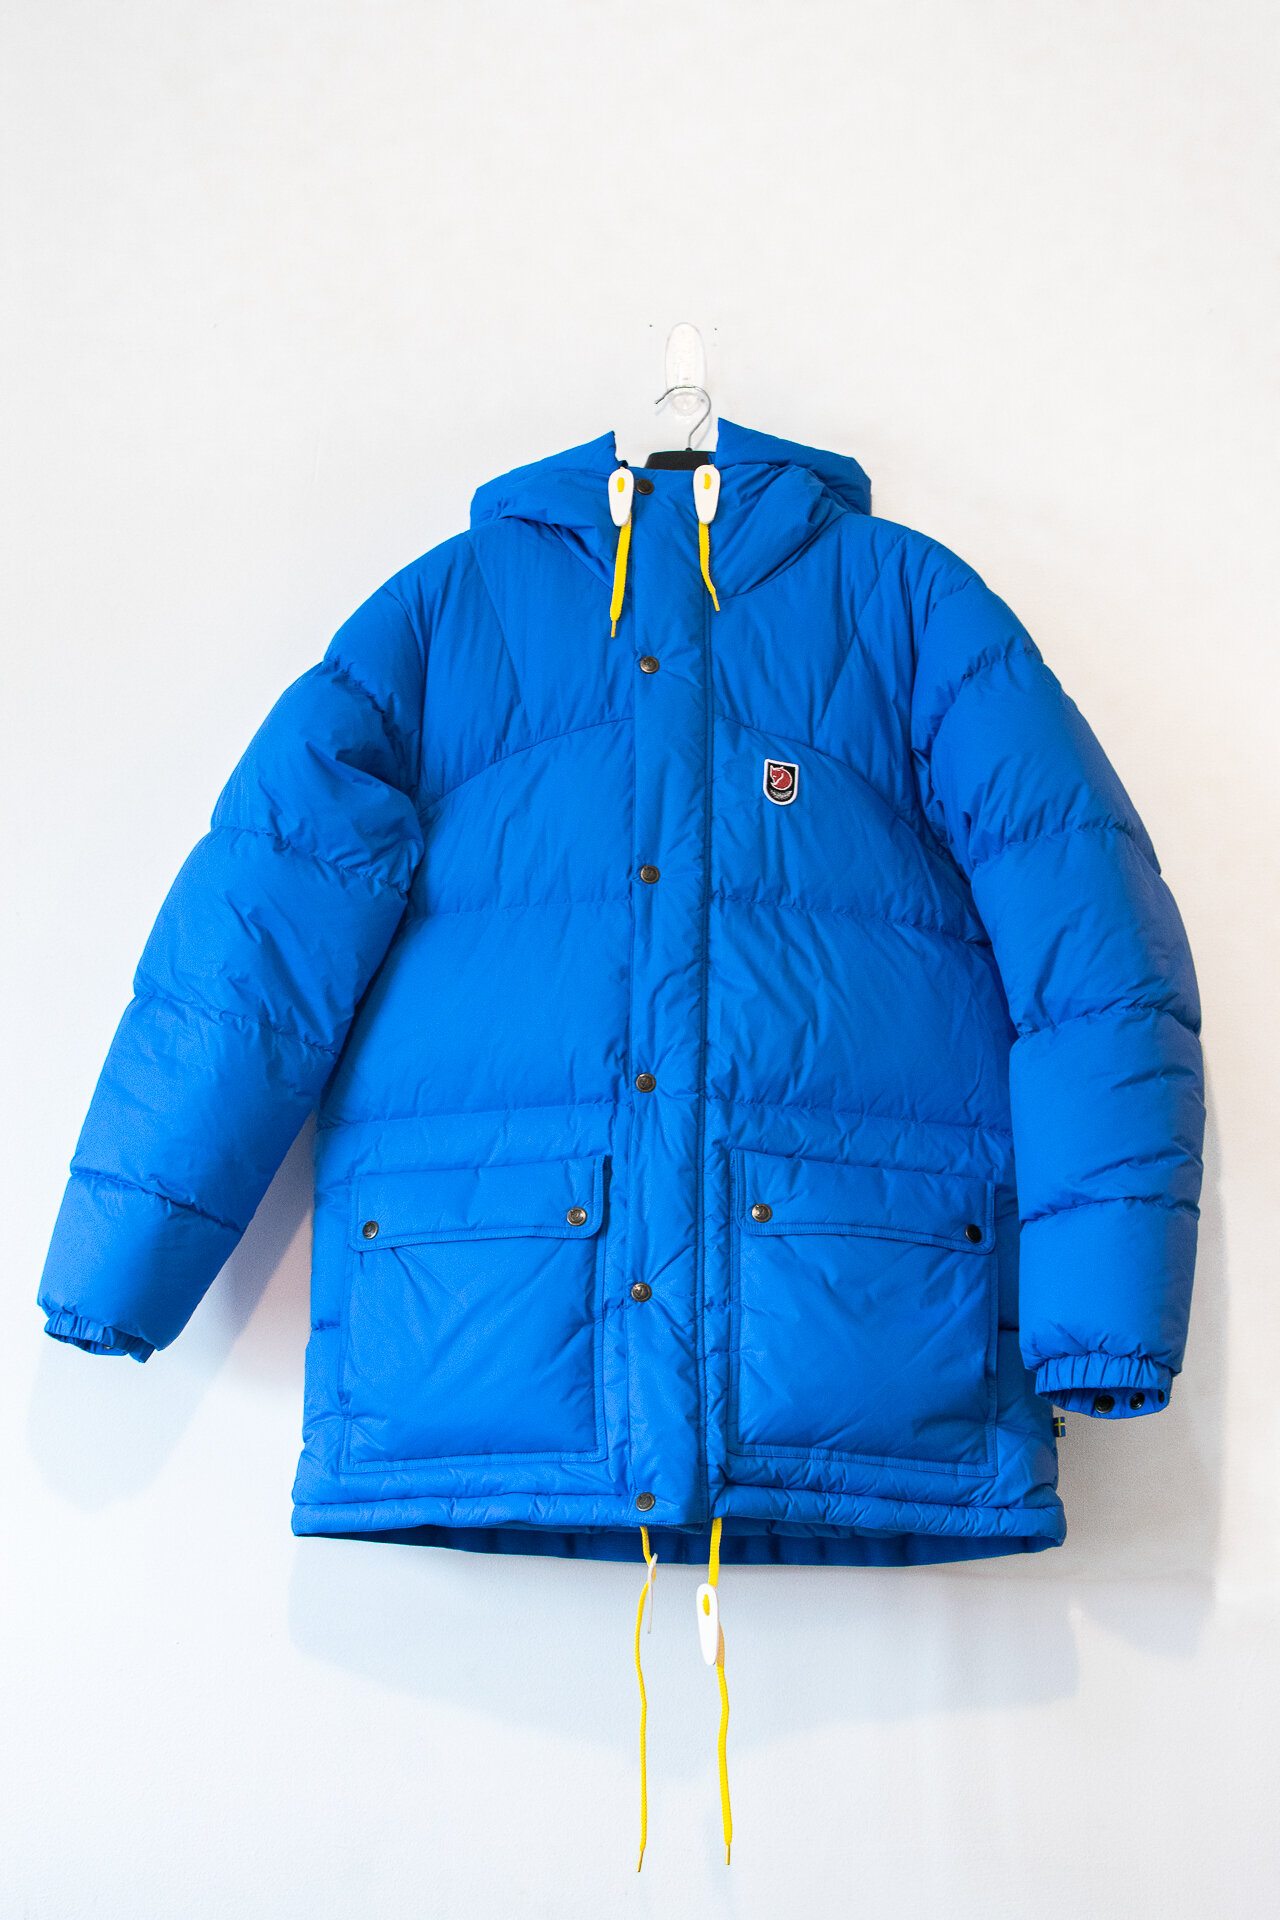 fjallraven-expedition-down-jacket-front-1.jpg